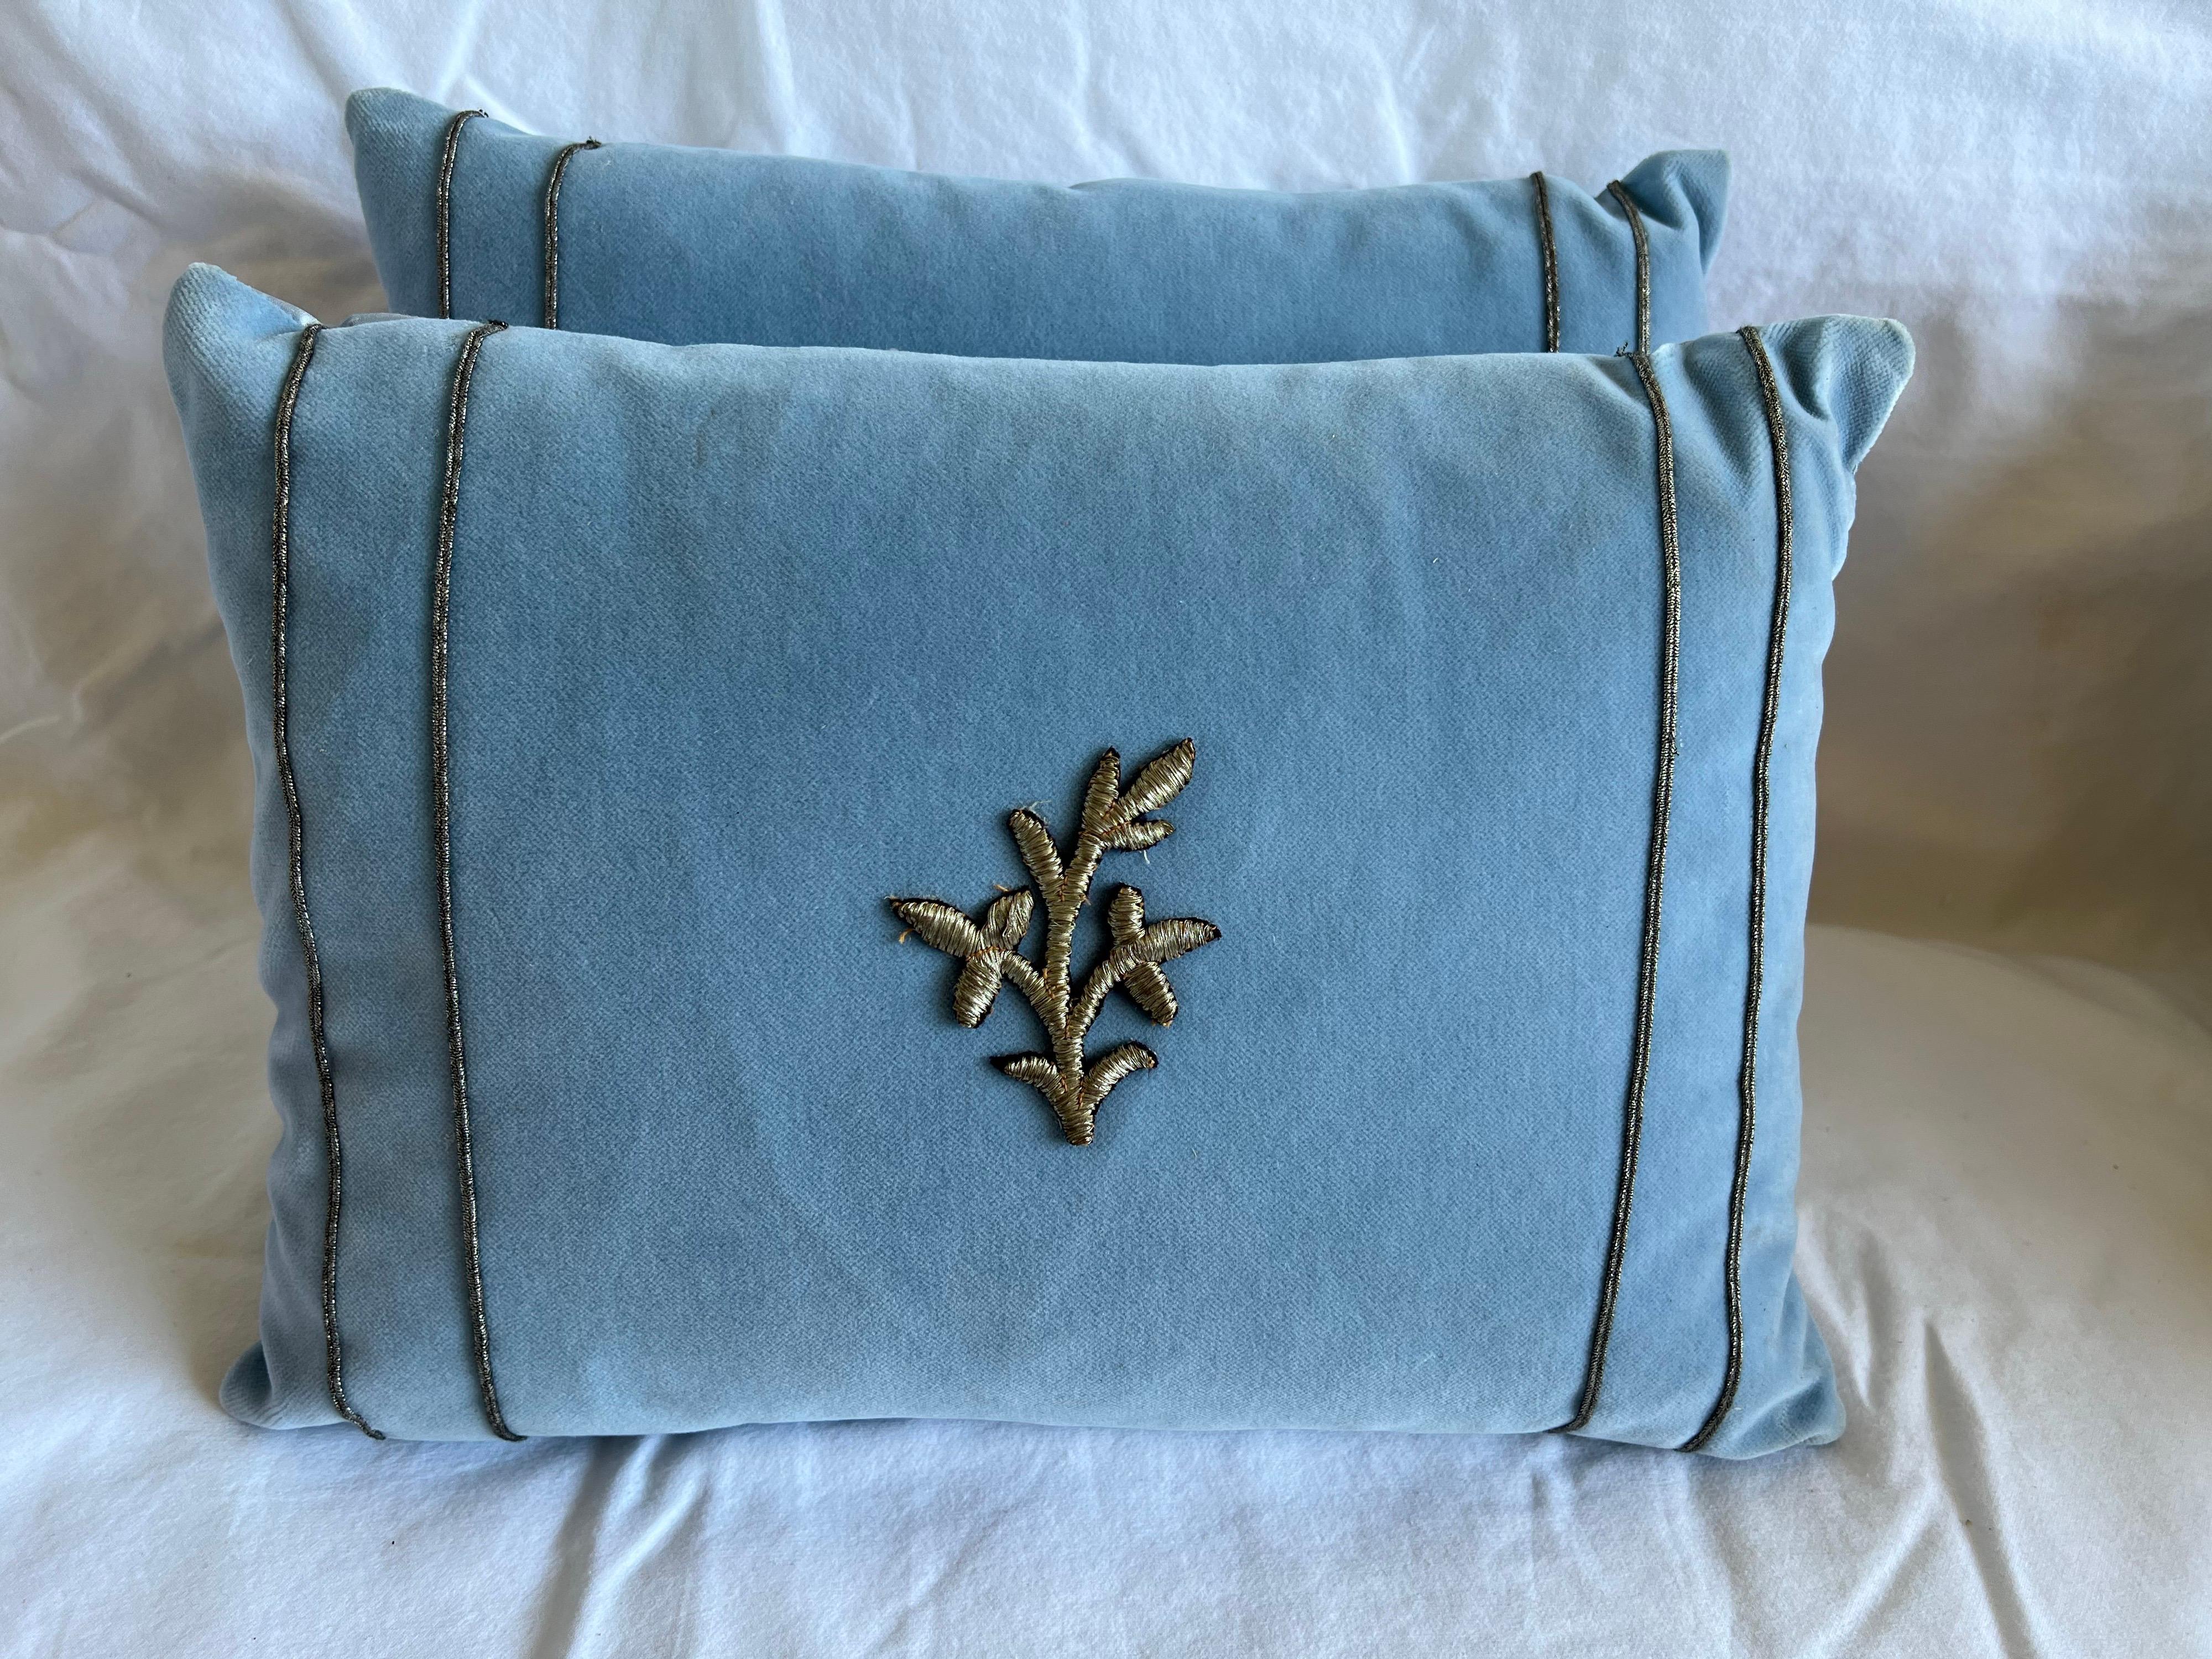 Pair of petite custom applique pillows made with 19th century Italian silver metallic flowers sewn on the fronts of blue velvet pillows. The pillows are also detailed with silver metallic trim at both sides. Down inserts, zipper closures.